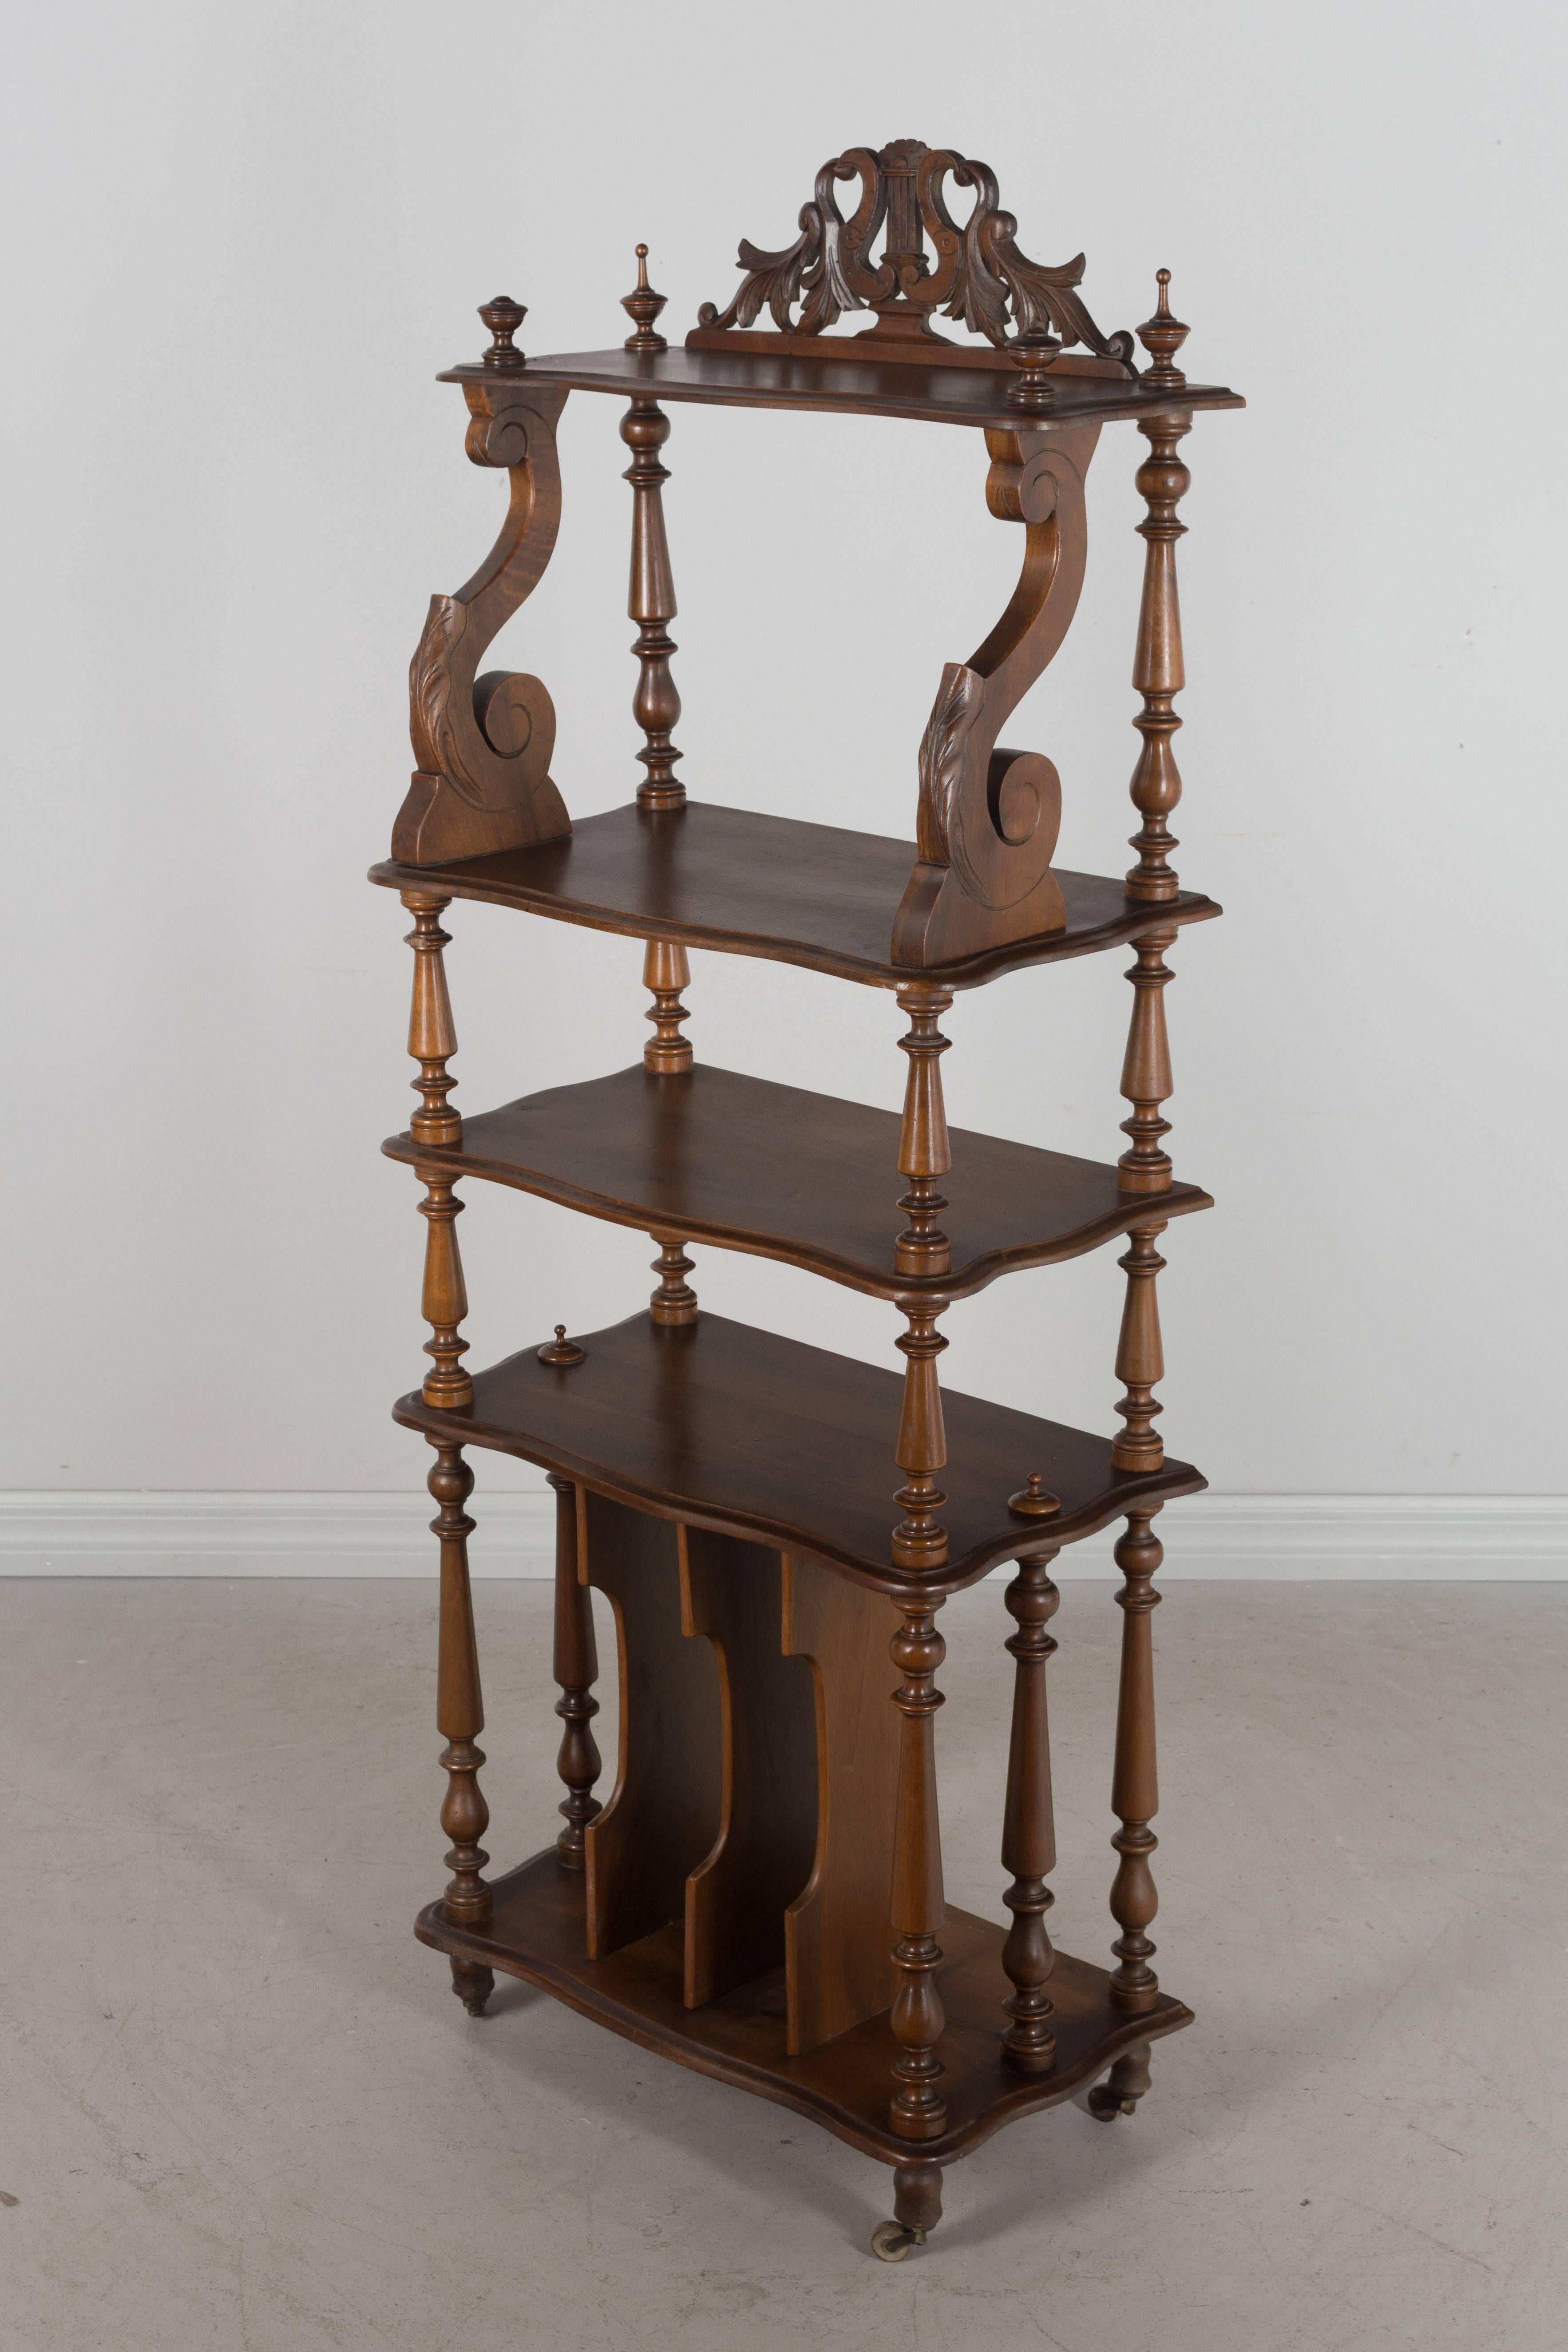 A French music stand or étagère made of walnut with three shelves and vertical dividers at the bottom to store sheet music. Beautiful turned wood spindles and finials. Hand-carved decorative pediment at the top with a lyre and acanthus leaves.
More